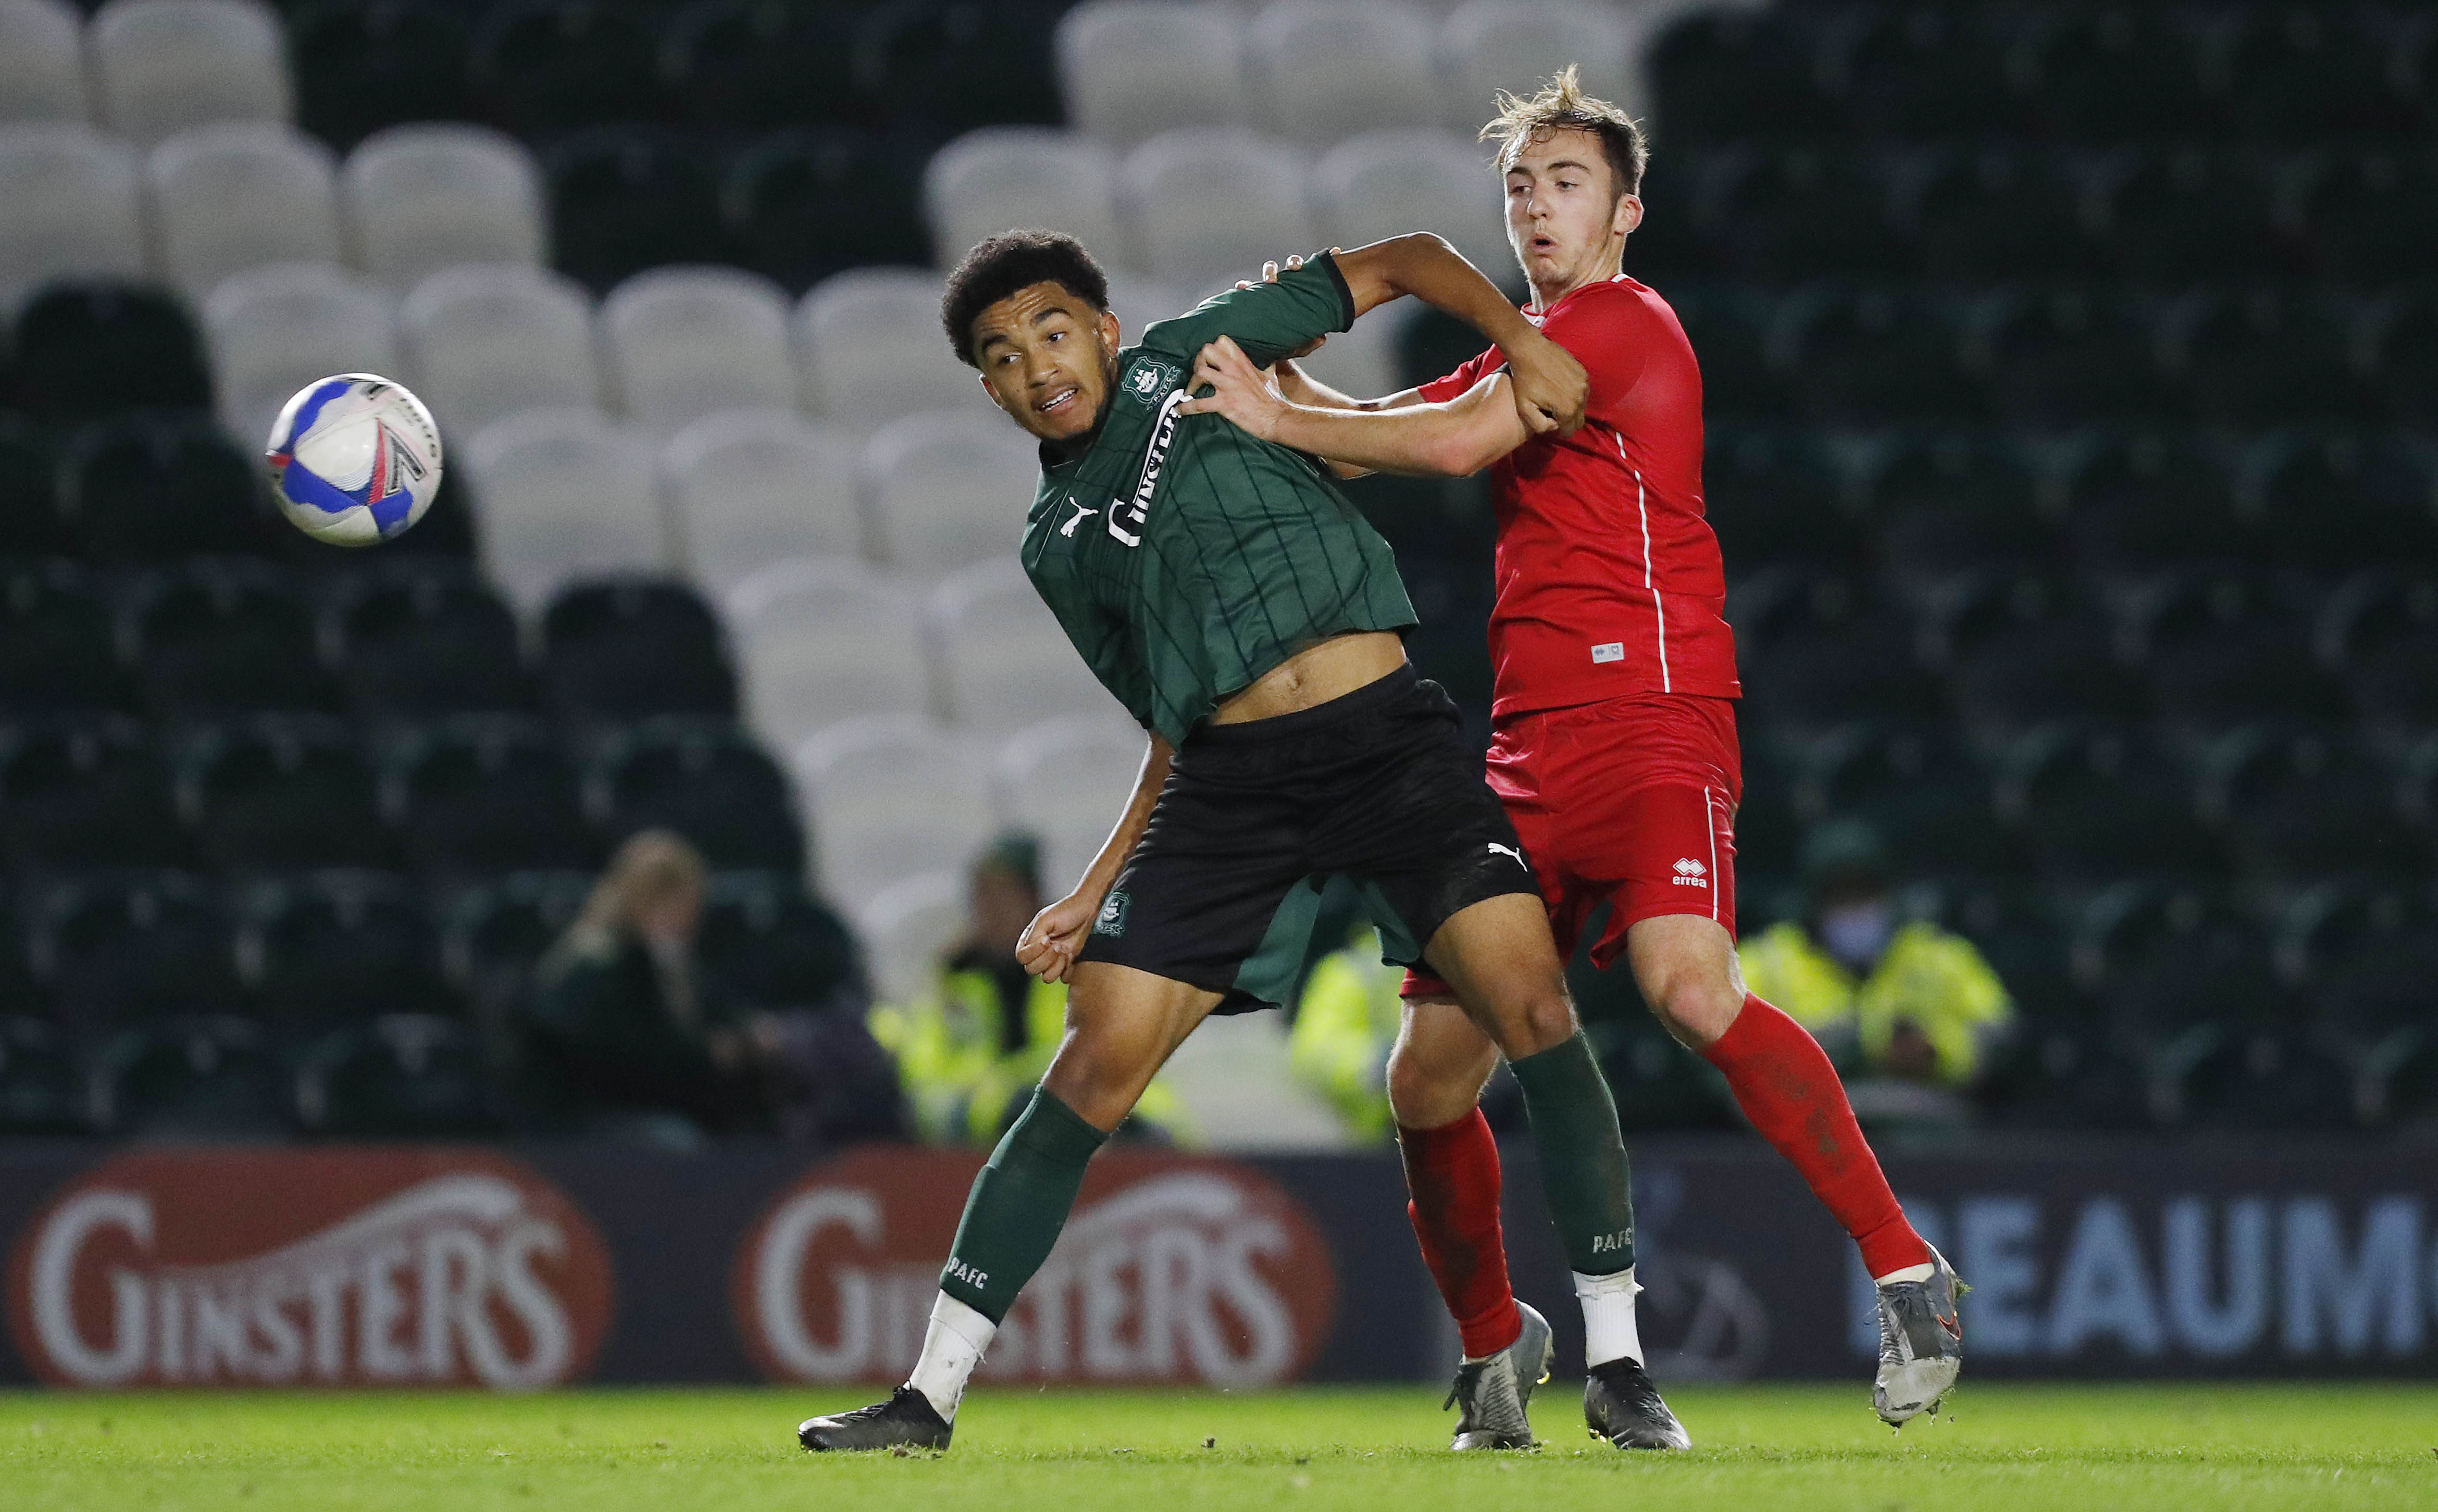 Jamal Salawu in FA Youth Cup action